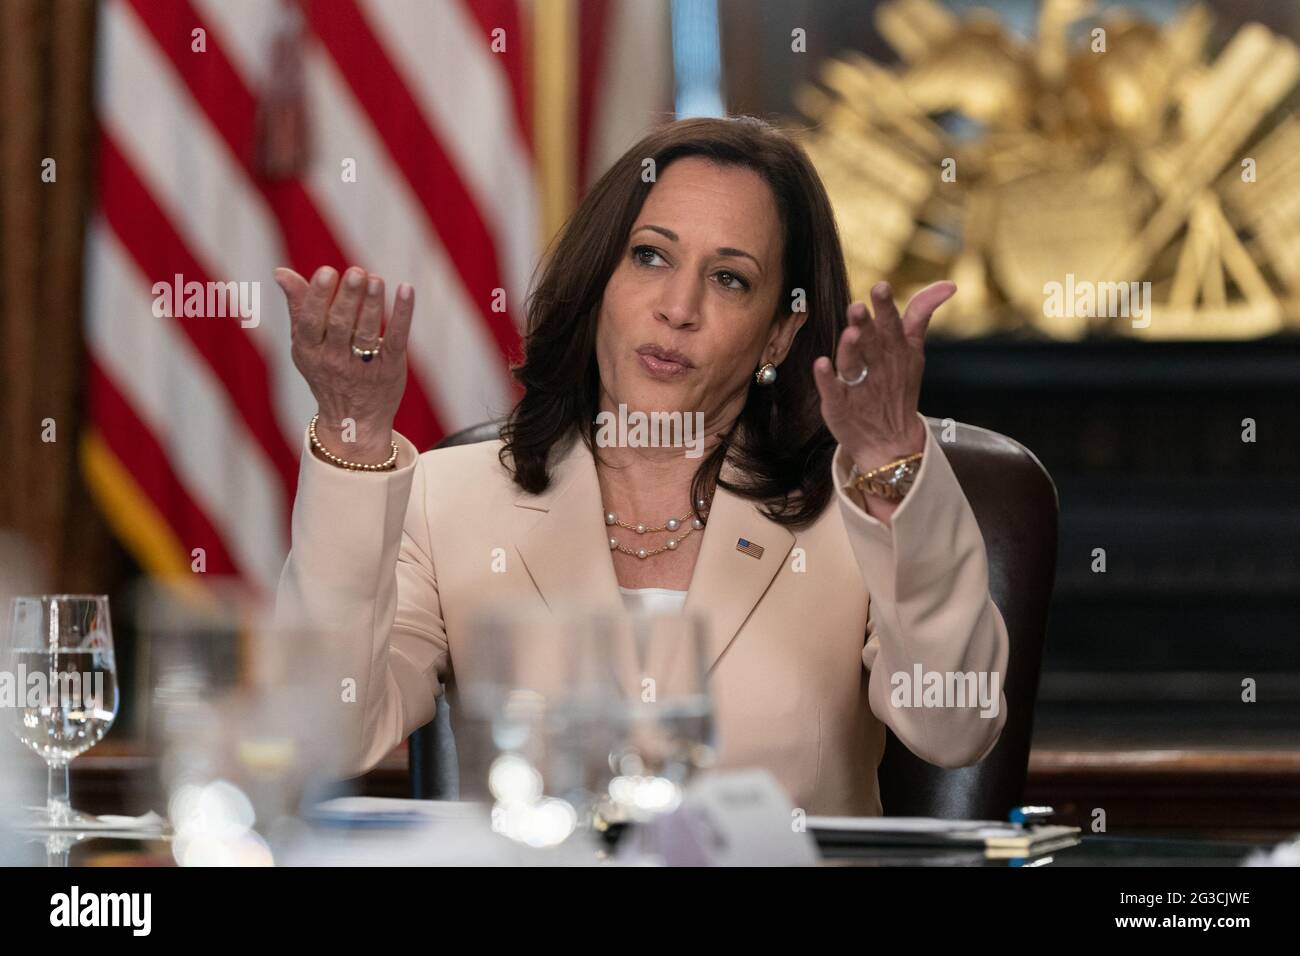 United States Vice President Kamala Harris holds a meeting to mark the ninth anniversary of the creation of Deferred Action for Childhood Arrivals(DACA) in the Vice President's Ceremonial Office in the Eisenhower Executive Office Building in Washington, DC, June 15, 2021. Credit: Chris Kleponis / Pool via CNP Stock Photo